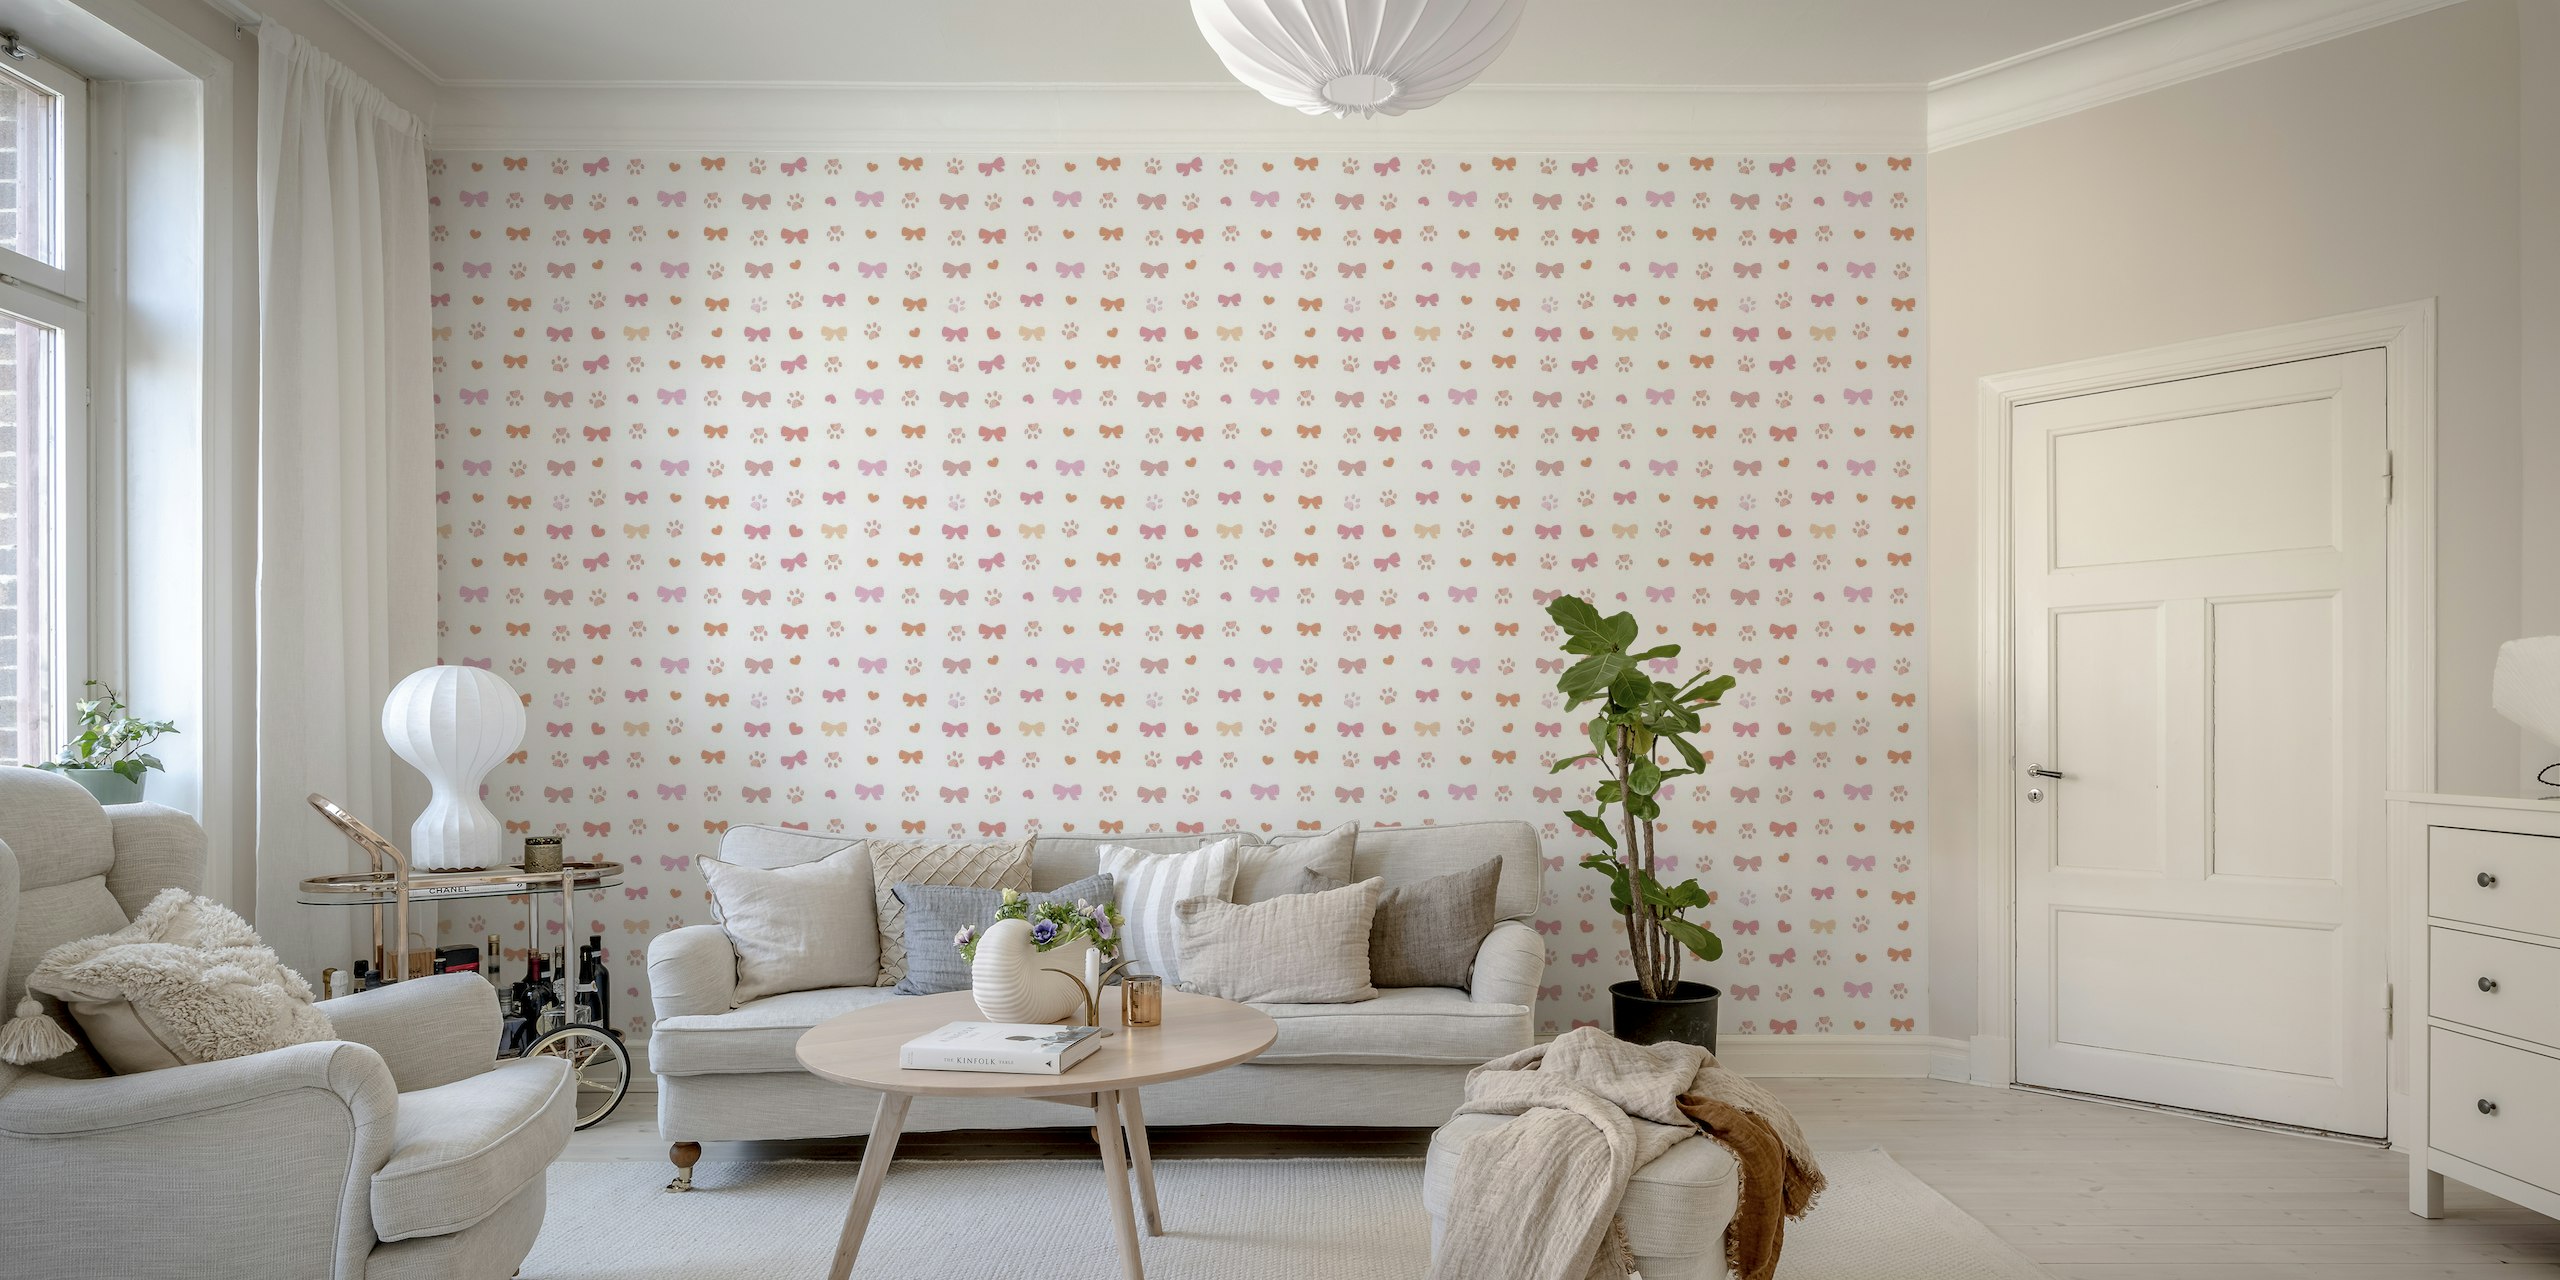 Bow ties and hearts with paw prints wallpaper